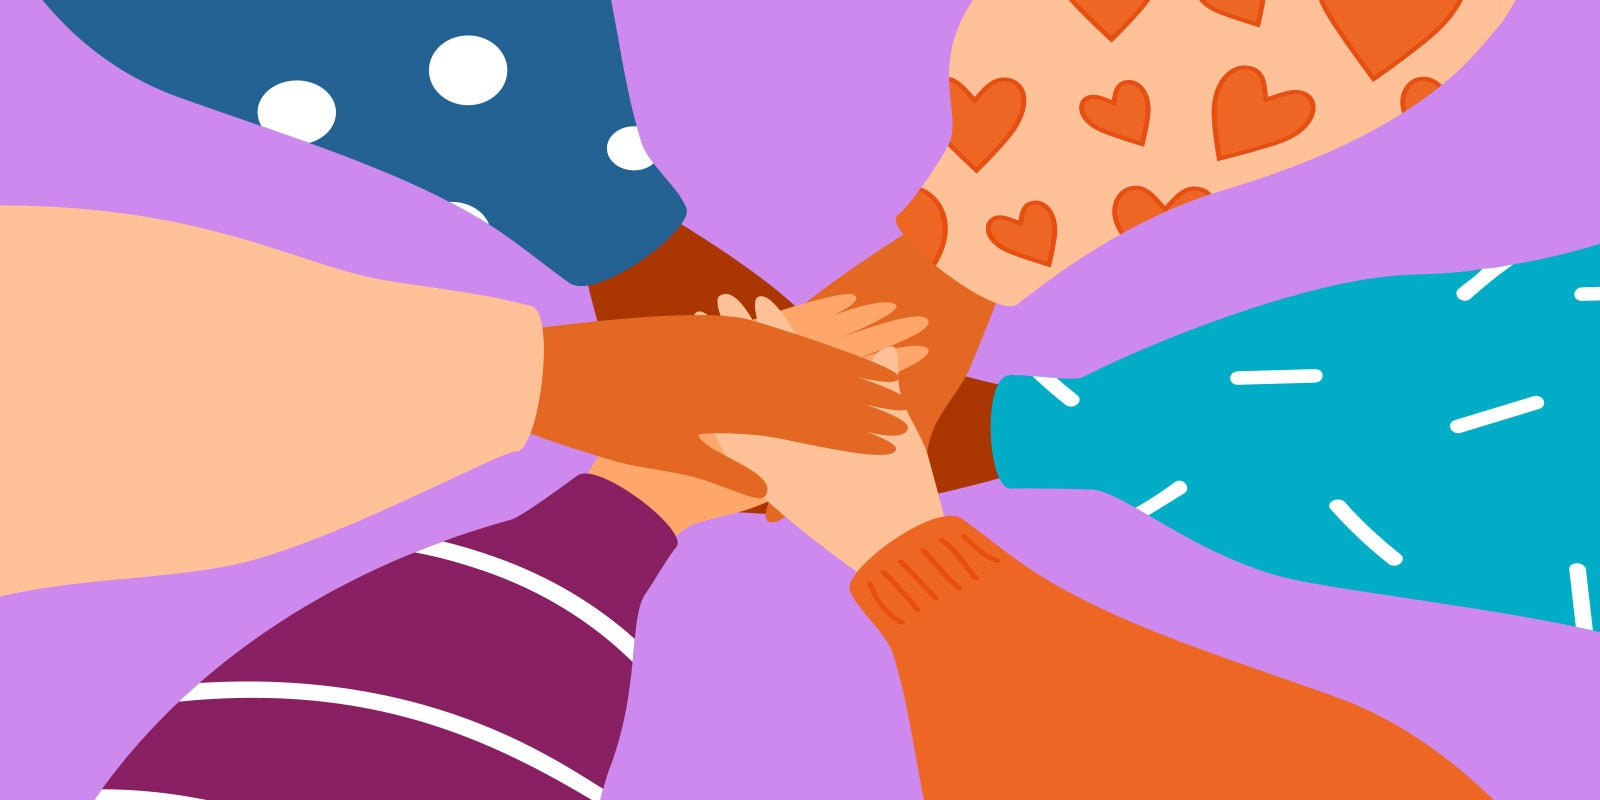 animated image of different colored hands on top of each other with different designs on the shirt sleeves, showing this blog is about how to be an ally in the workplace